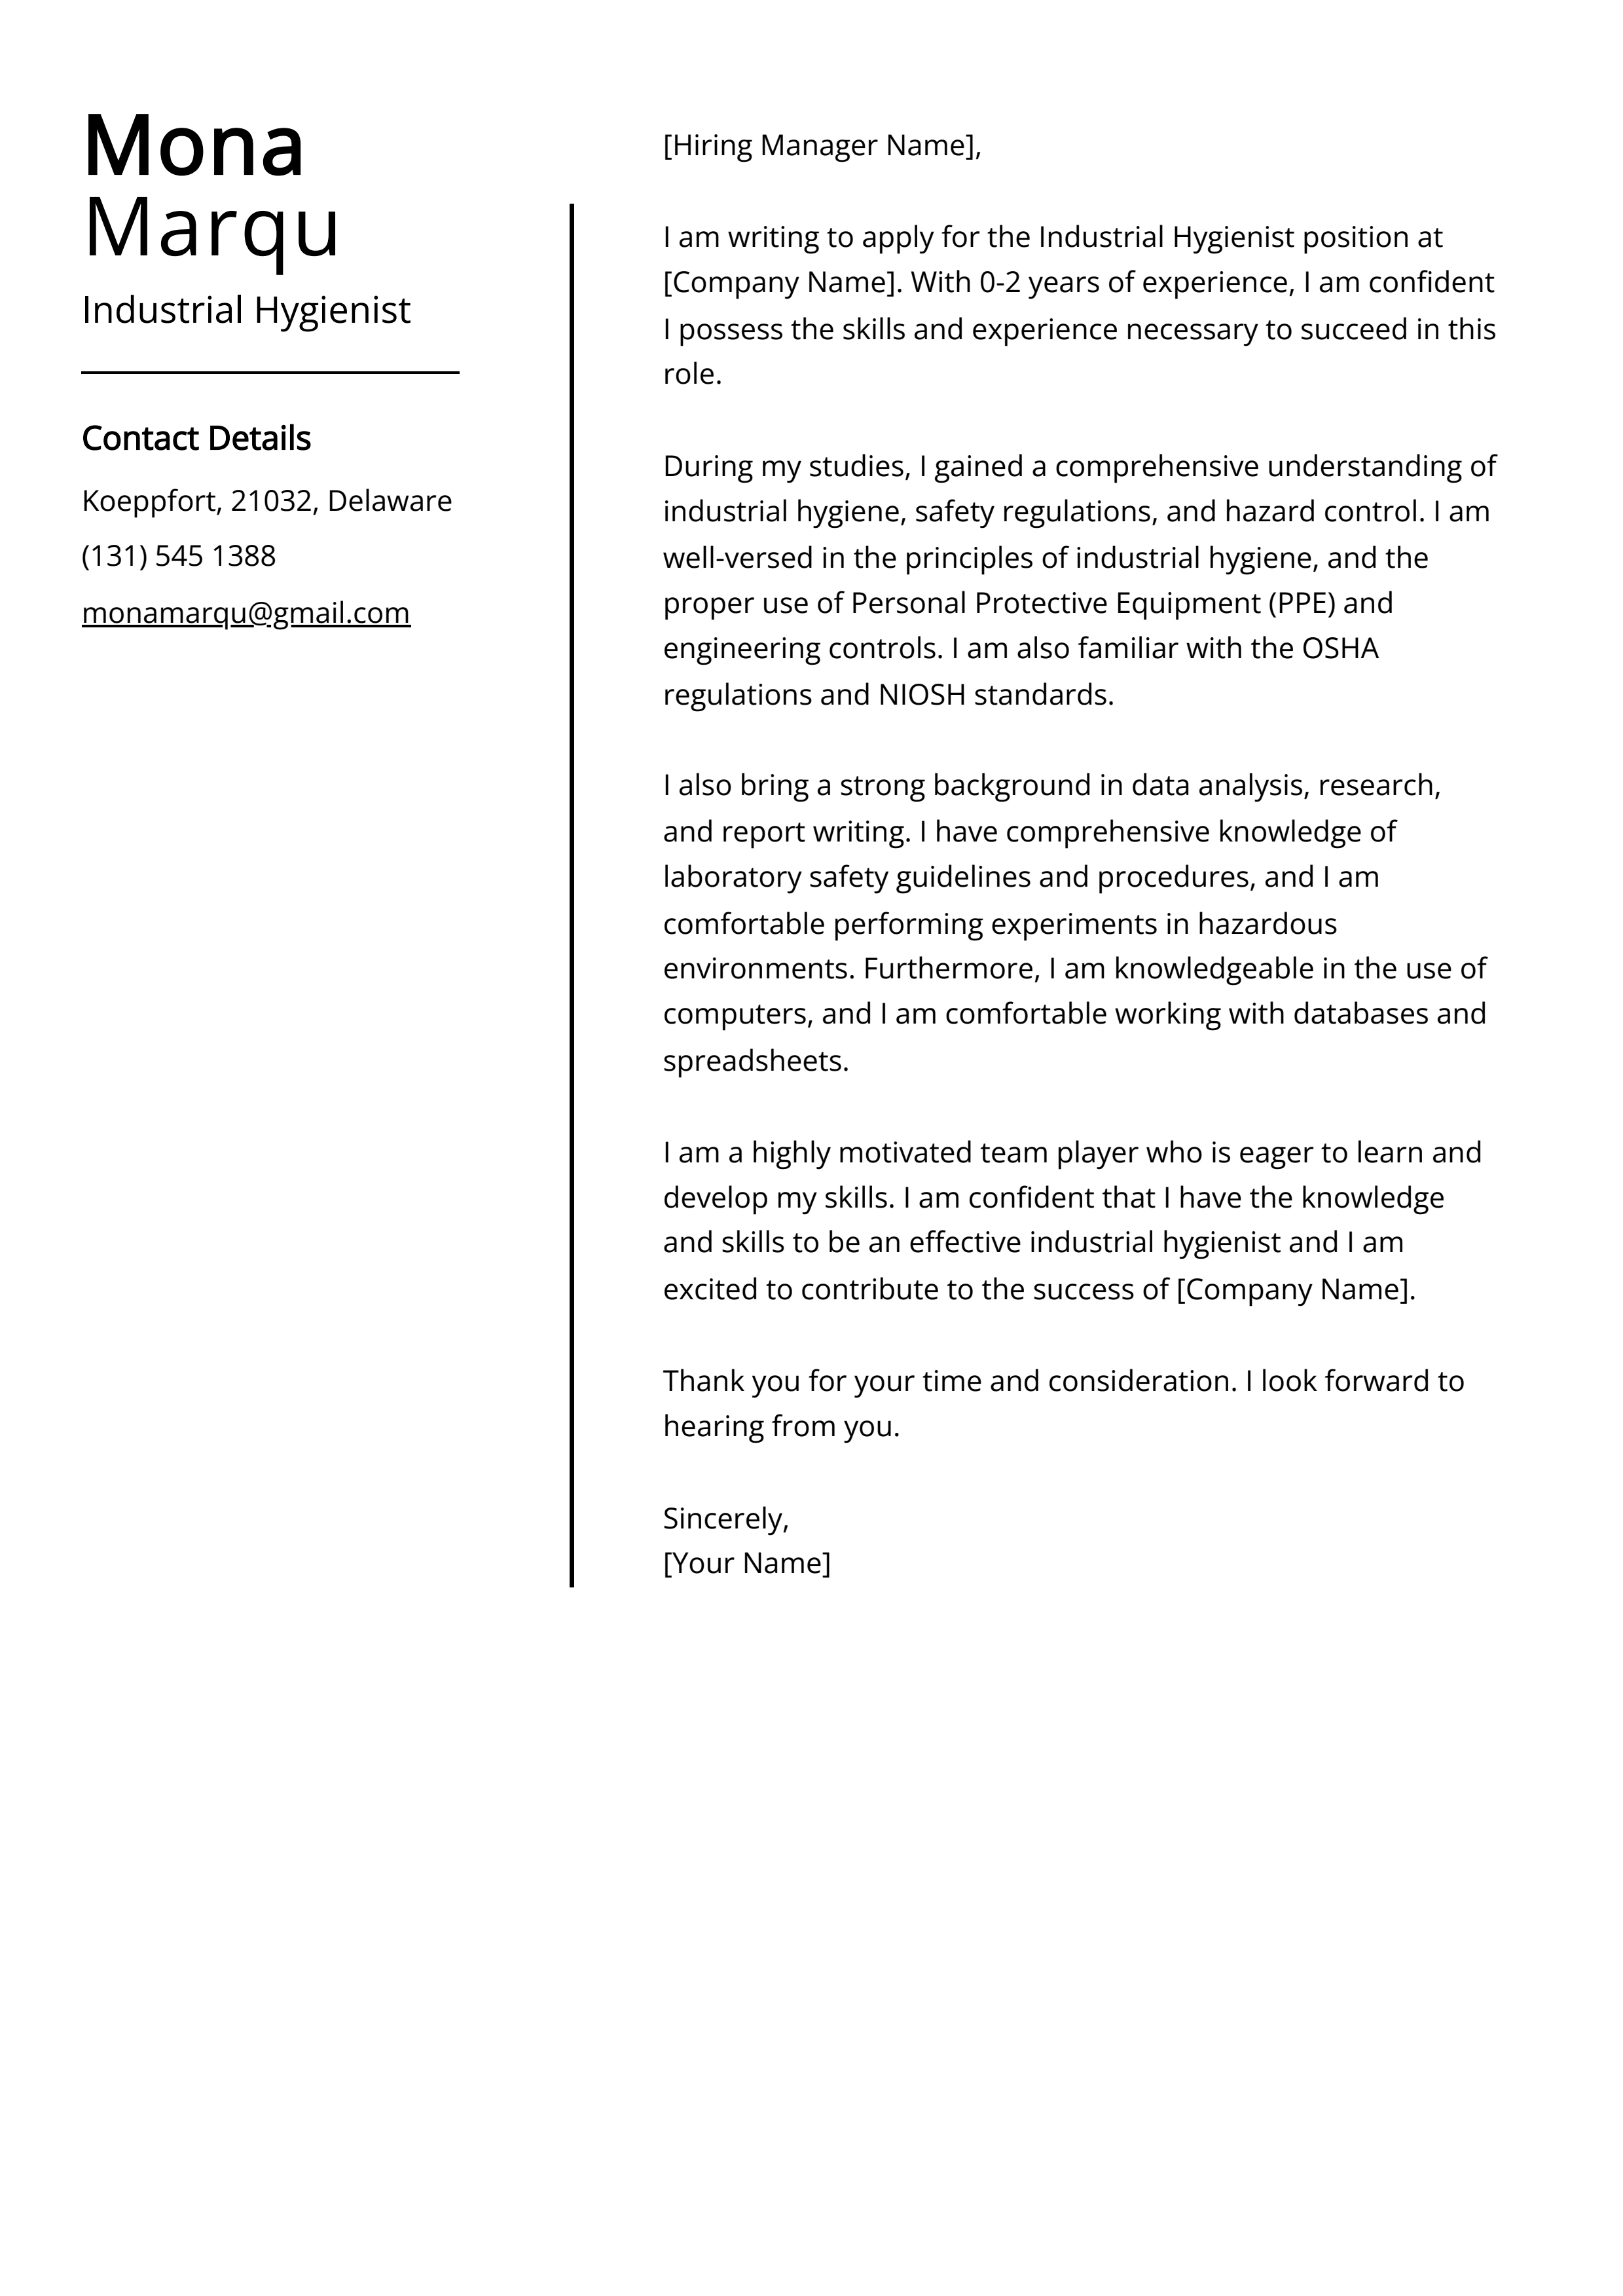 Industrial Hygienist Cover Letter Example